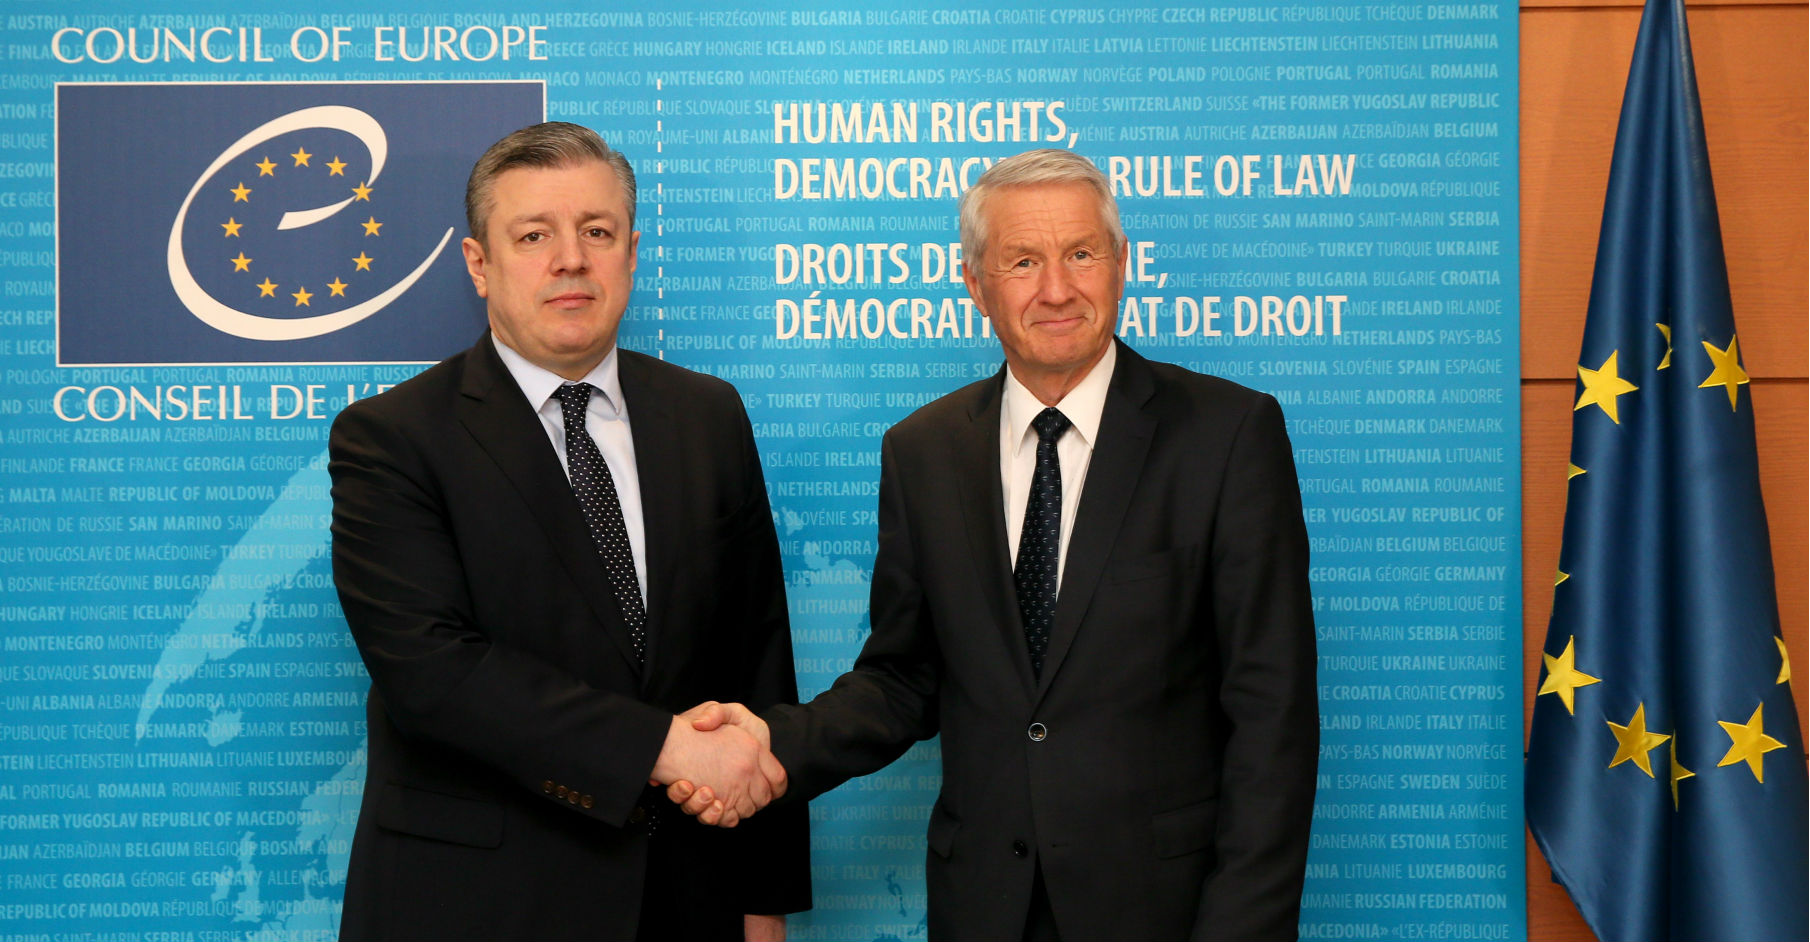 The Secretary General of Council of Europe meets the Prime Minister of Georgia